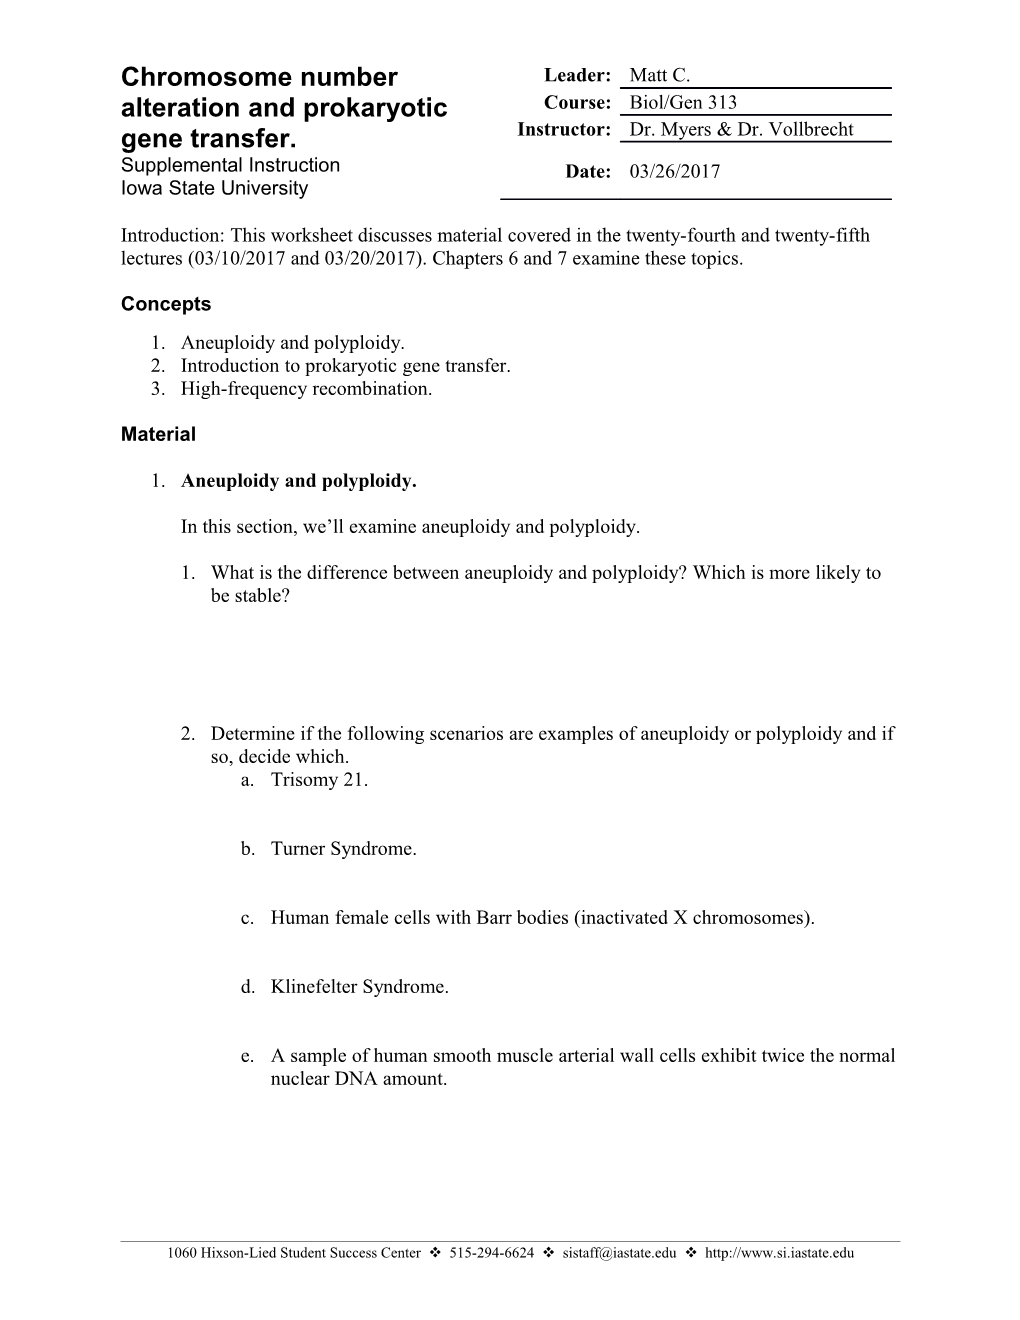 Introduction: This Worksheet Discusses Material Covered in the Twenty-Fourth and Twenty-Fifth